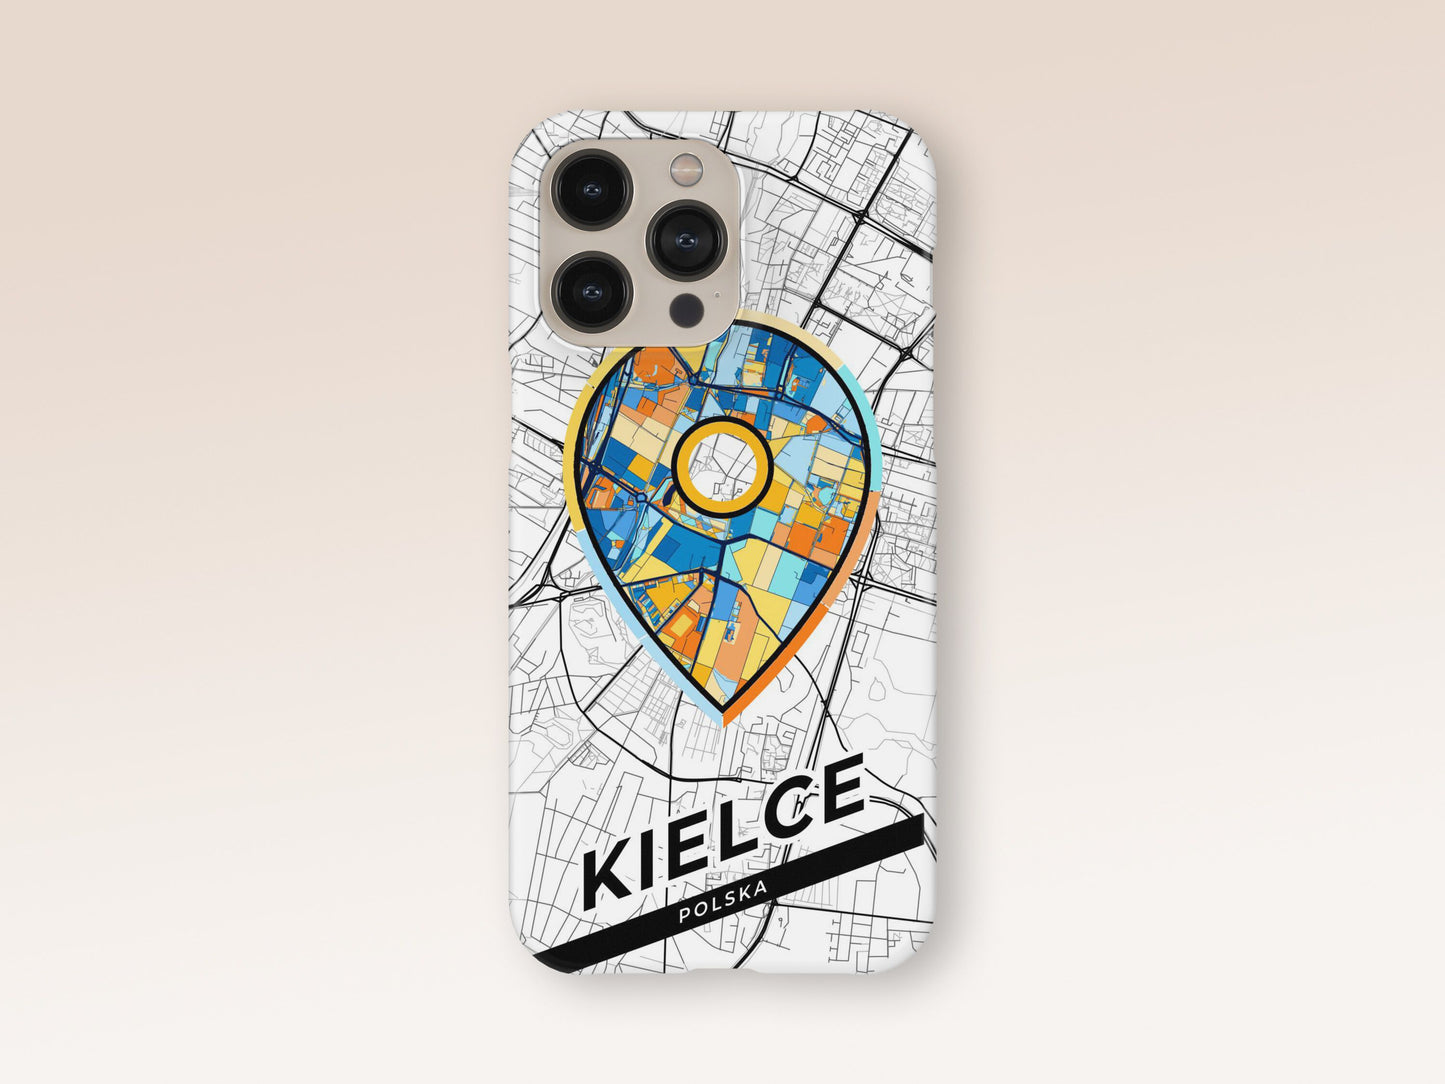 Kielce Poland slim phone case with colorful icon. Birthday, wedding or housewarming gift. Couple match cases. 1